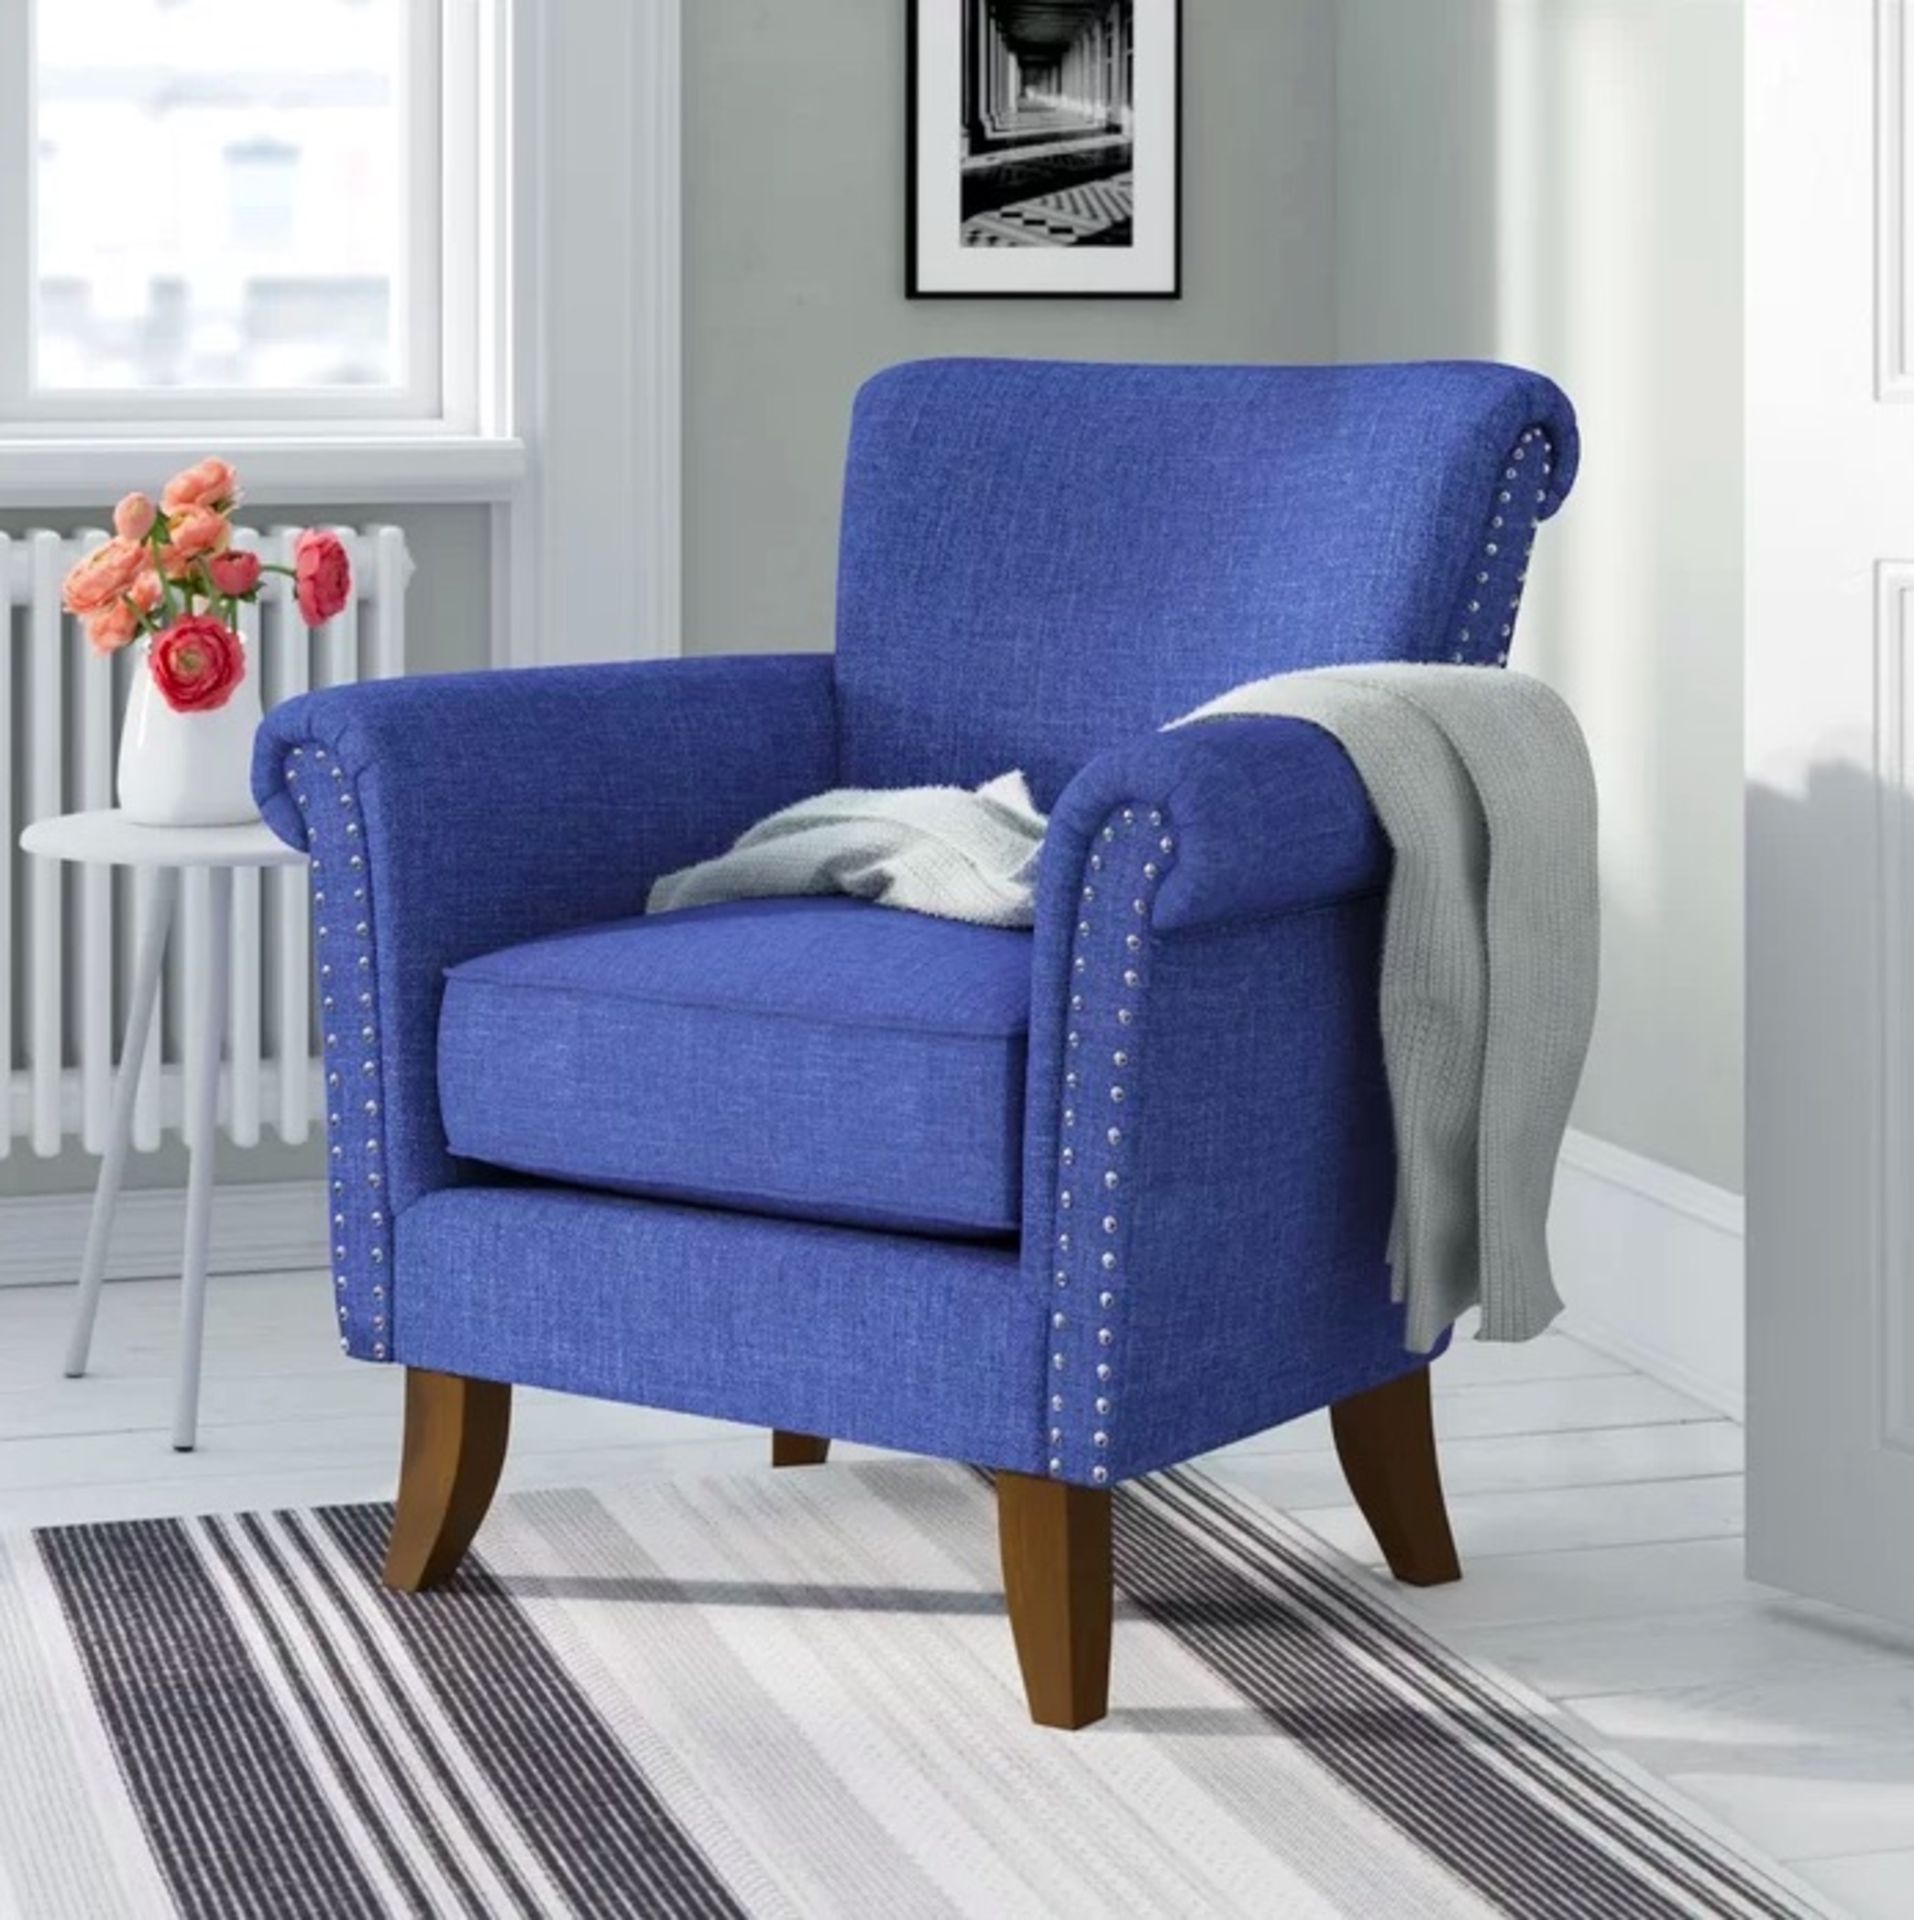 Contemporary Armchair A Stylish And Bold Contemporary Armchair With Winged Feet Upholstered In